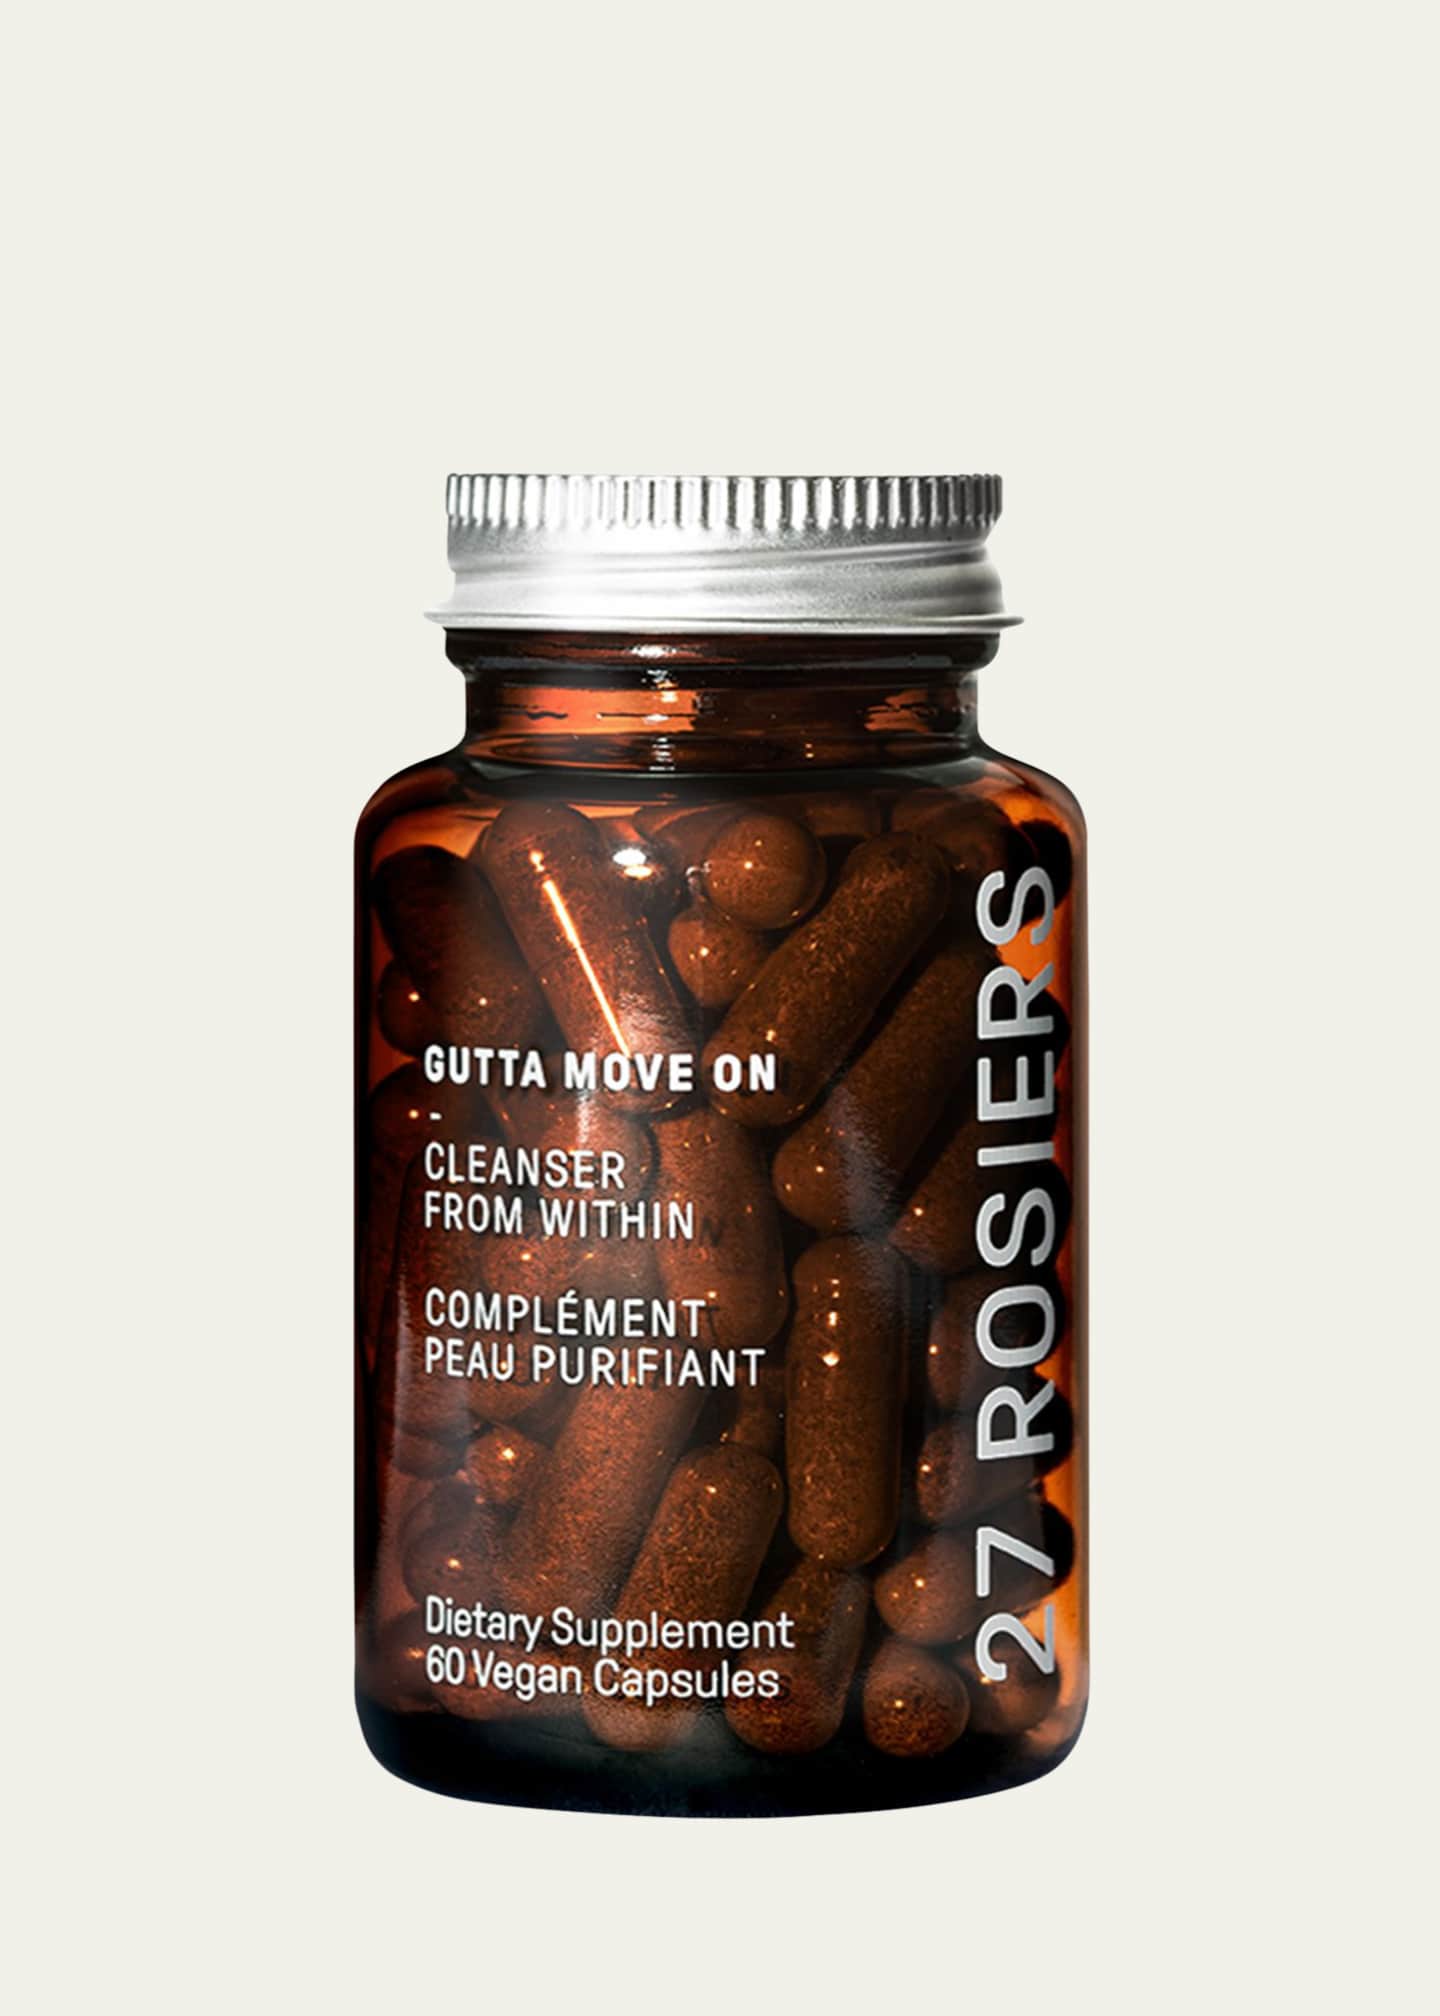 27 Rosiers Gutta Move On Cleanser From Within Dietary Supplement, 60 Capsules Image 1 of 3